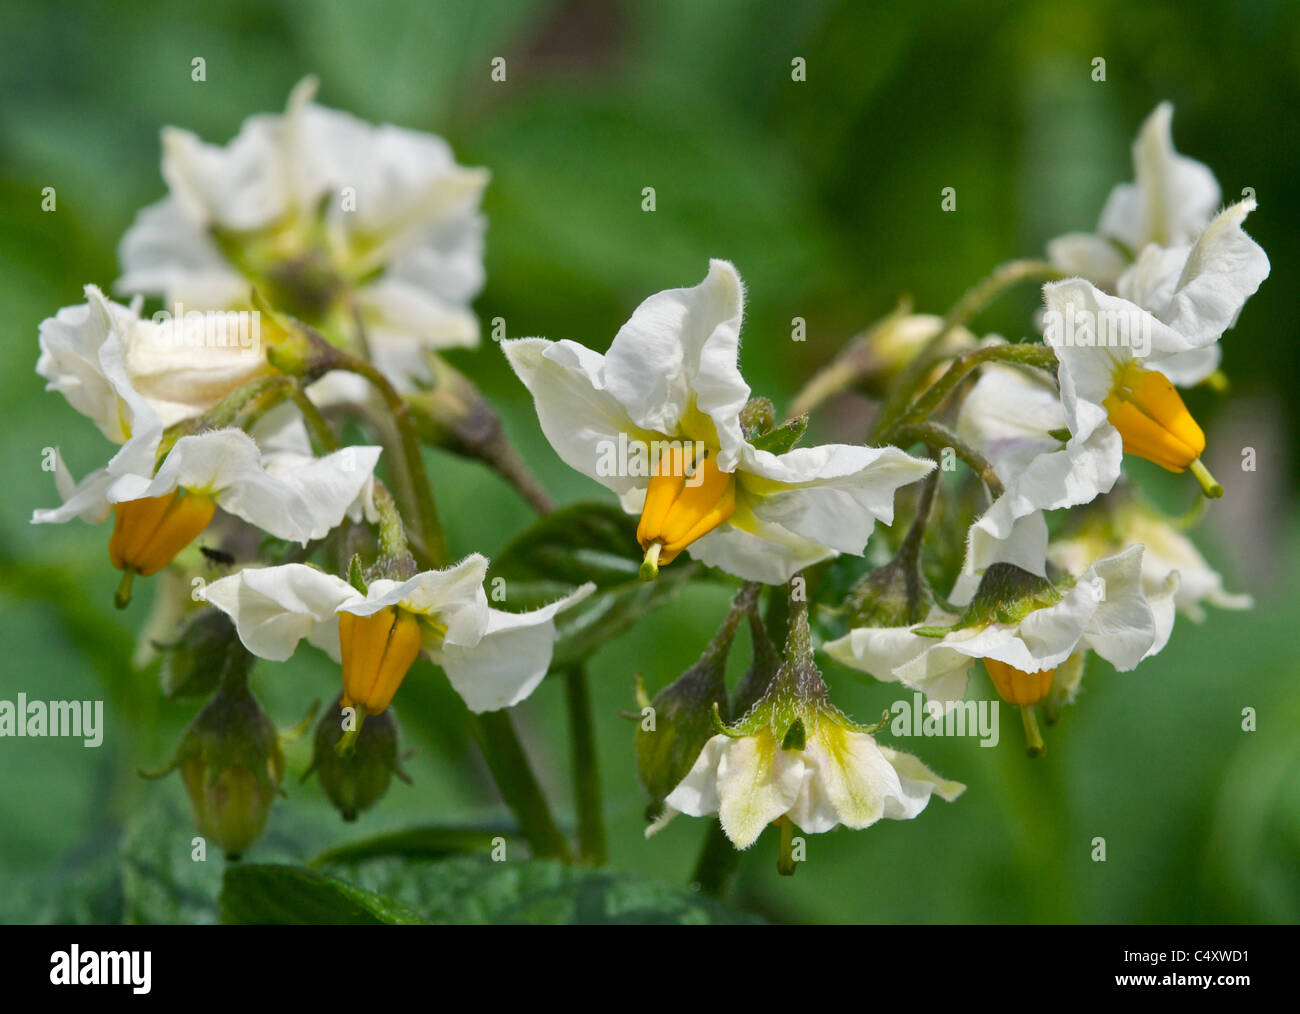 Potatoes growing in a cottage garden in flower Stock Photo